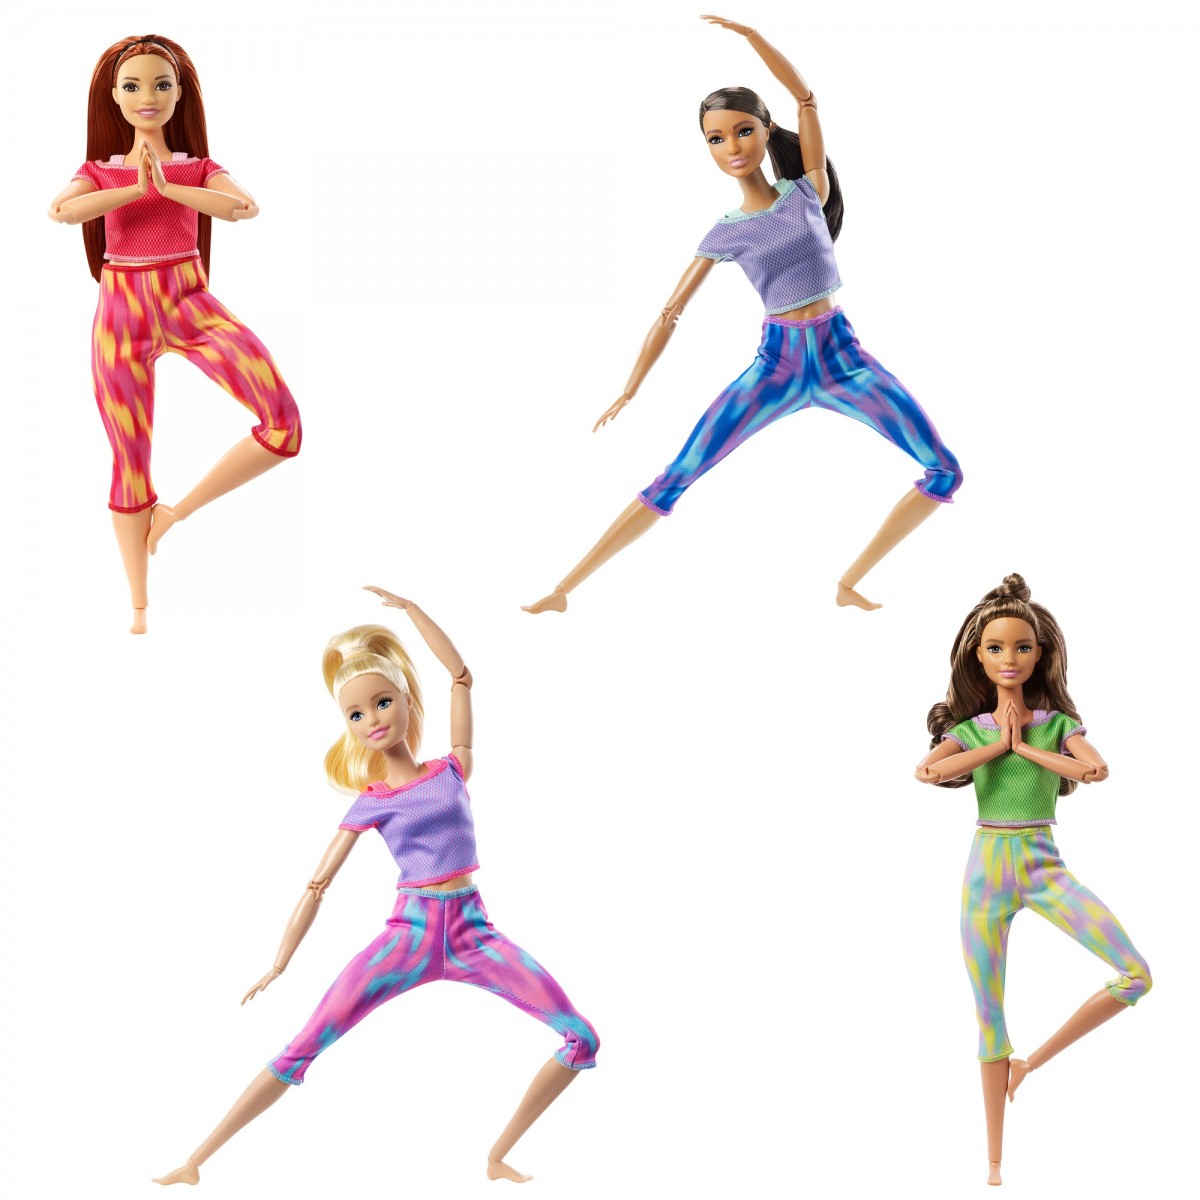 Barbie Made to Move, Yoga Barbie Dolls for Kids, , Set of 4, 3Y+, Multicolour, Assorted